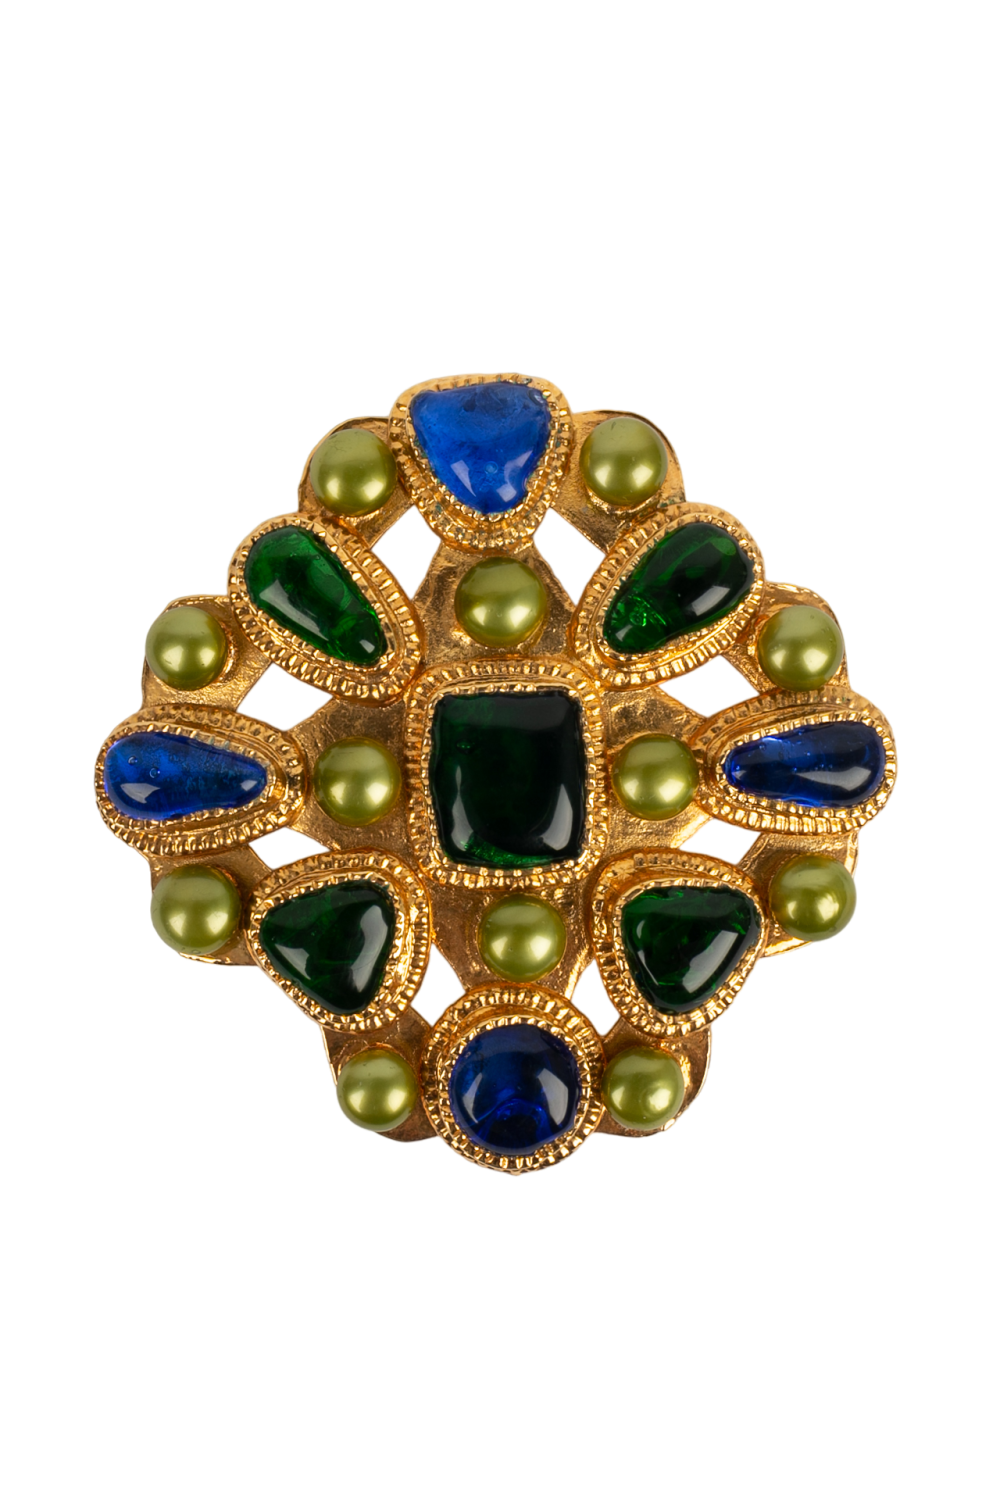 Broche Chanel Automne 1991